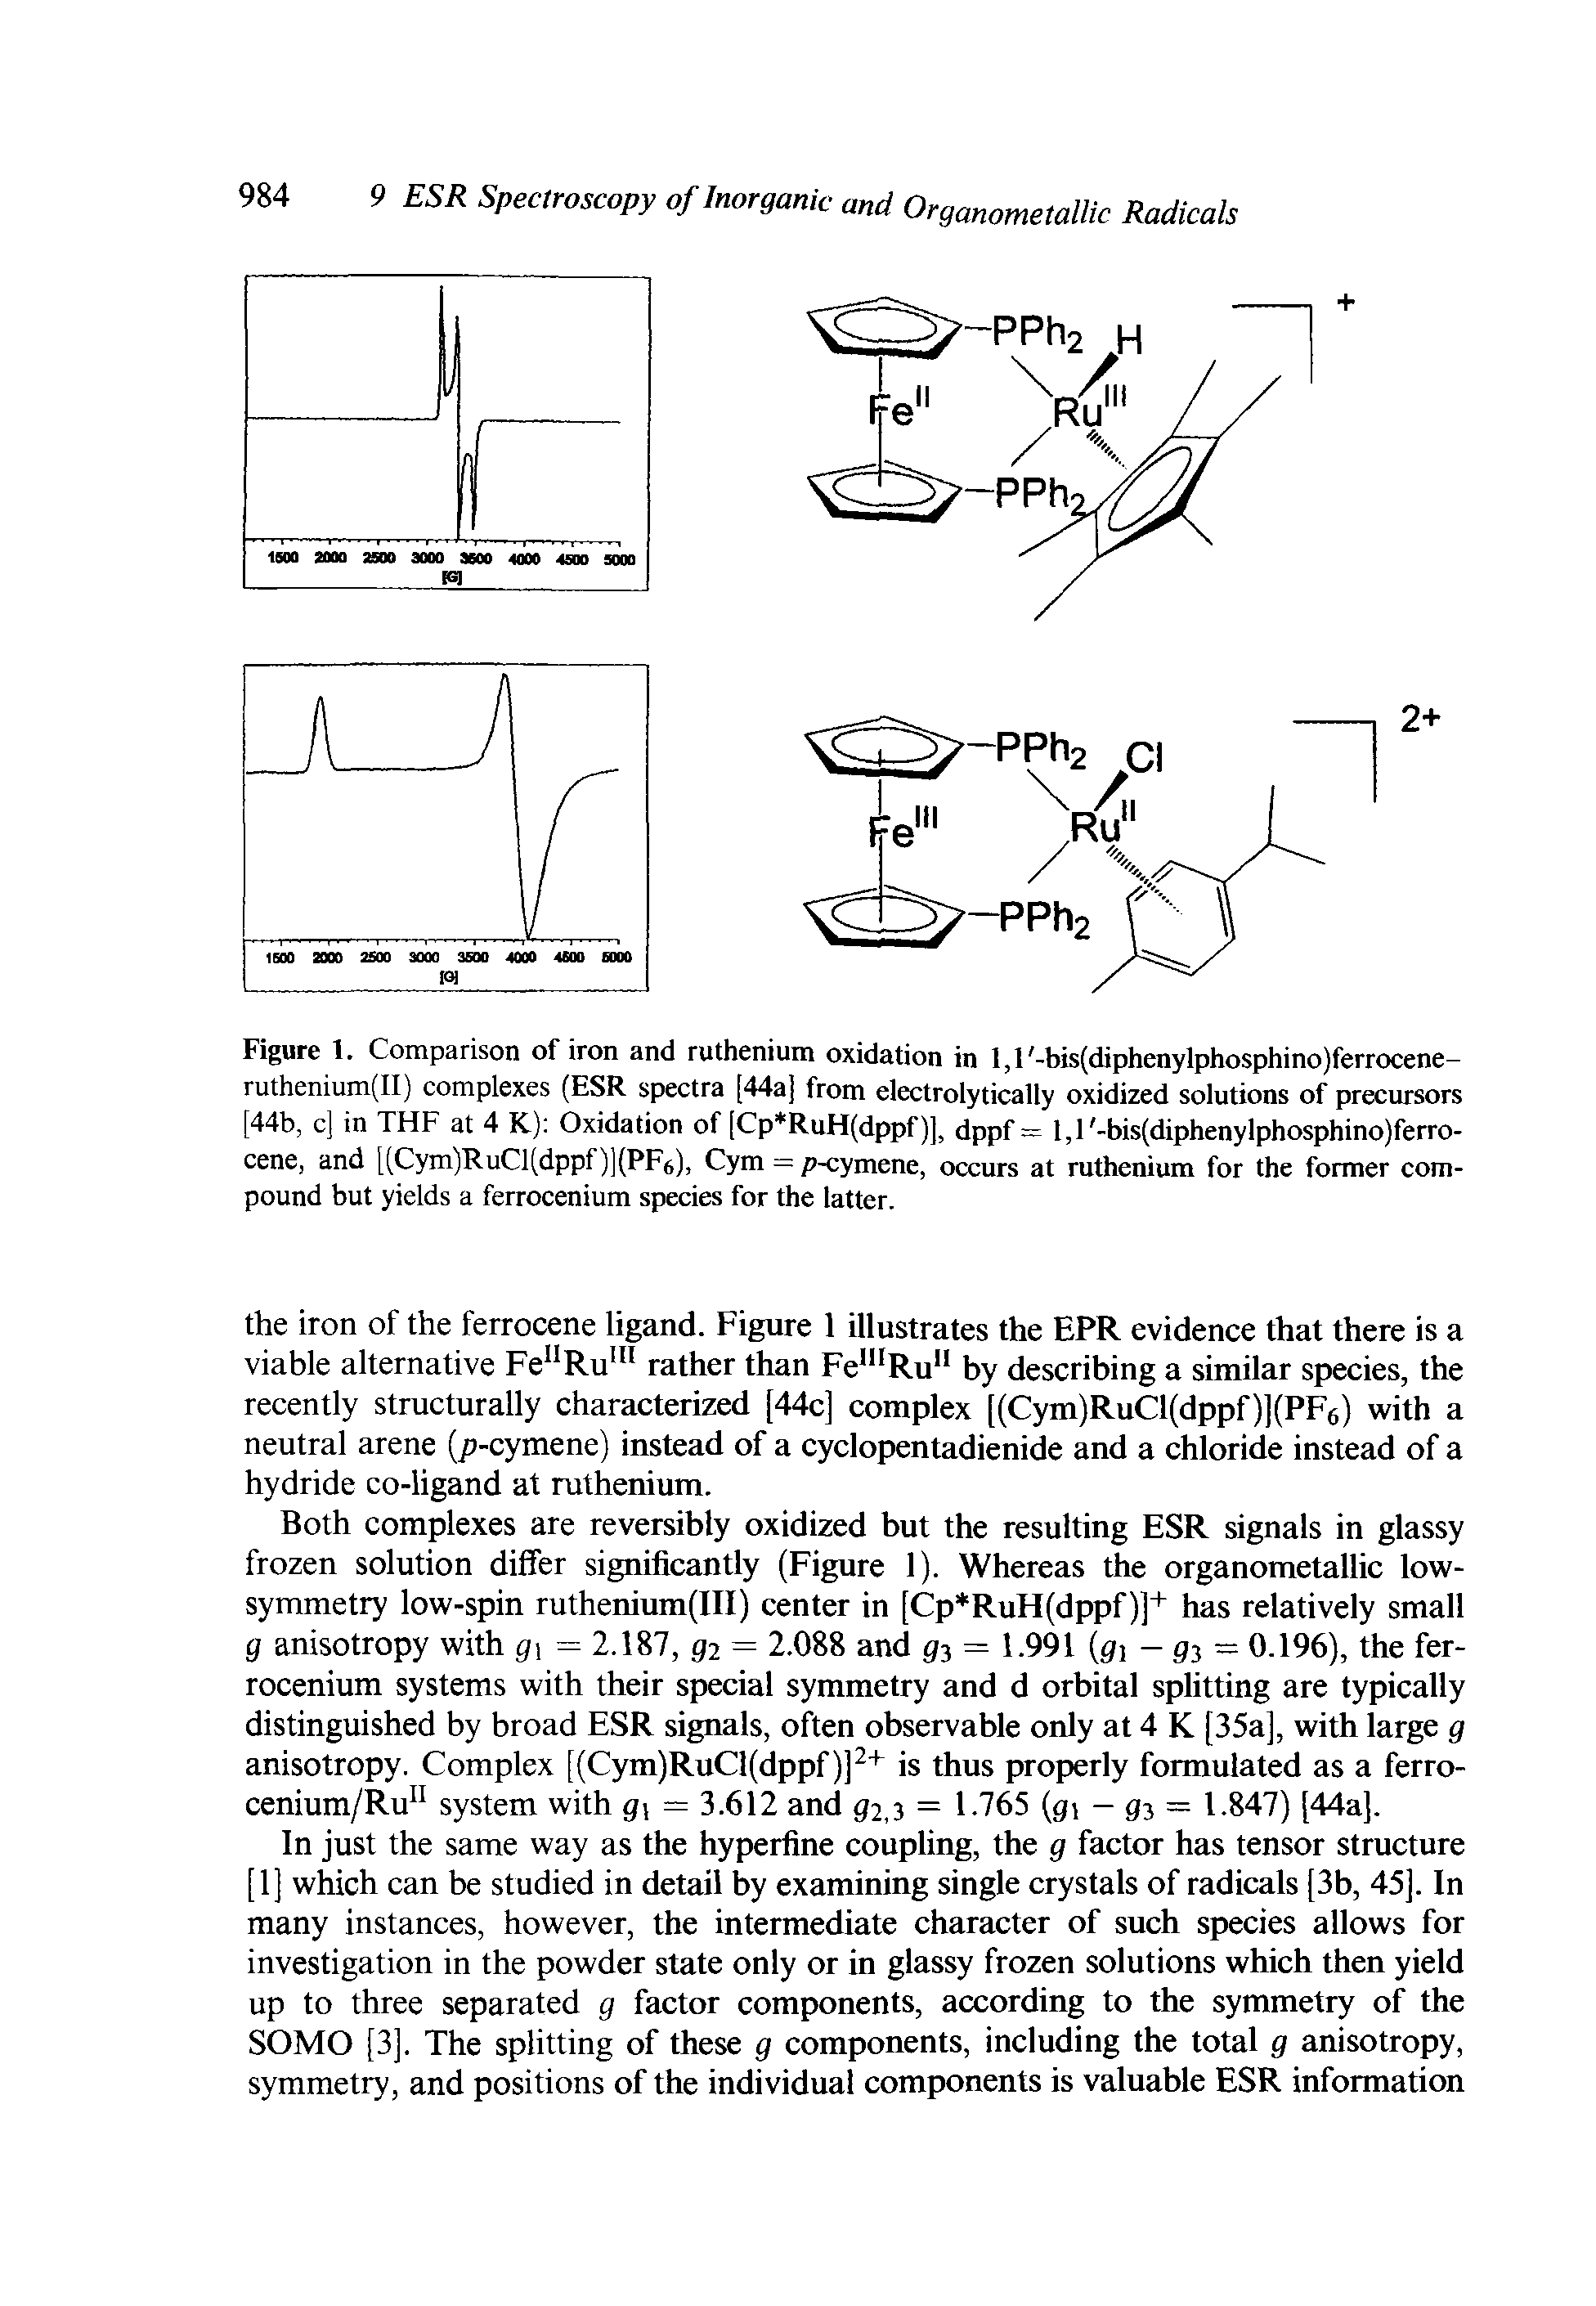 Figure 1. Comparison of iron and ruthenium oxidation in l,l -bis(diphenylphosphino)ferrocene-ruthenium(II) complexes (ESR spectra [44a] from electrolytically oxidized solutions of precursors [44b, c] in THE at 4 K) Oxidation of [Cp RuH(dppf), dppf= l,l -bis(diphenylphosphino)ferro-cene, and [(Cym)RuCl[dppf)](PF6), Cym = p-cymene, occurs at ruthenium for the former compound but yields a ferrocenium species for the latter.